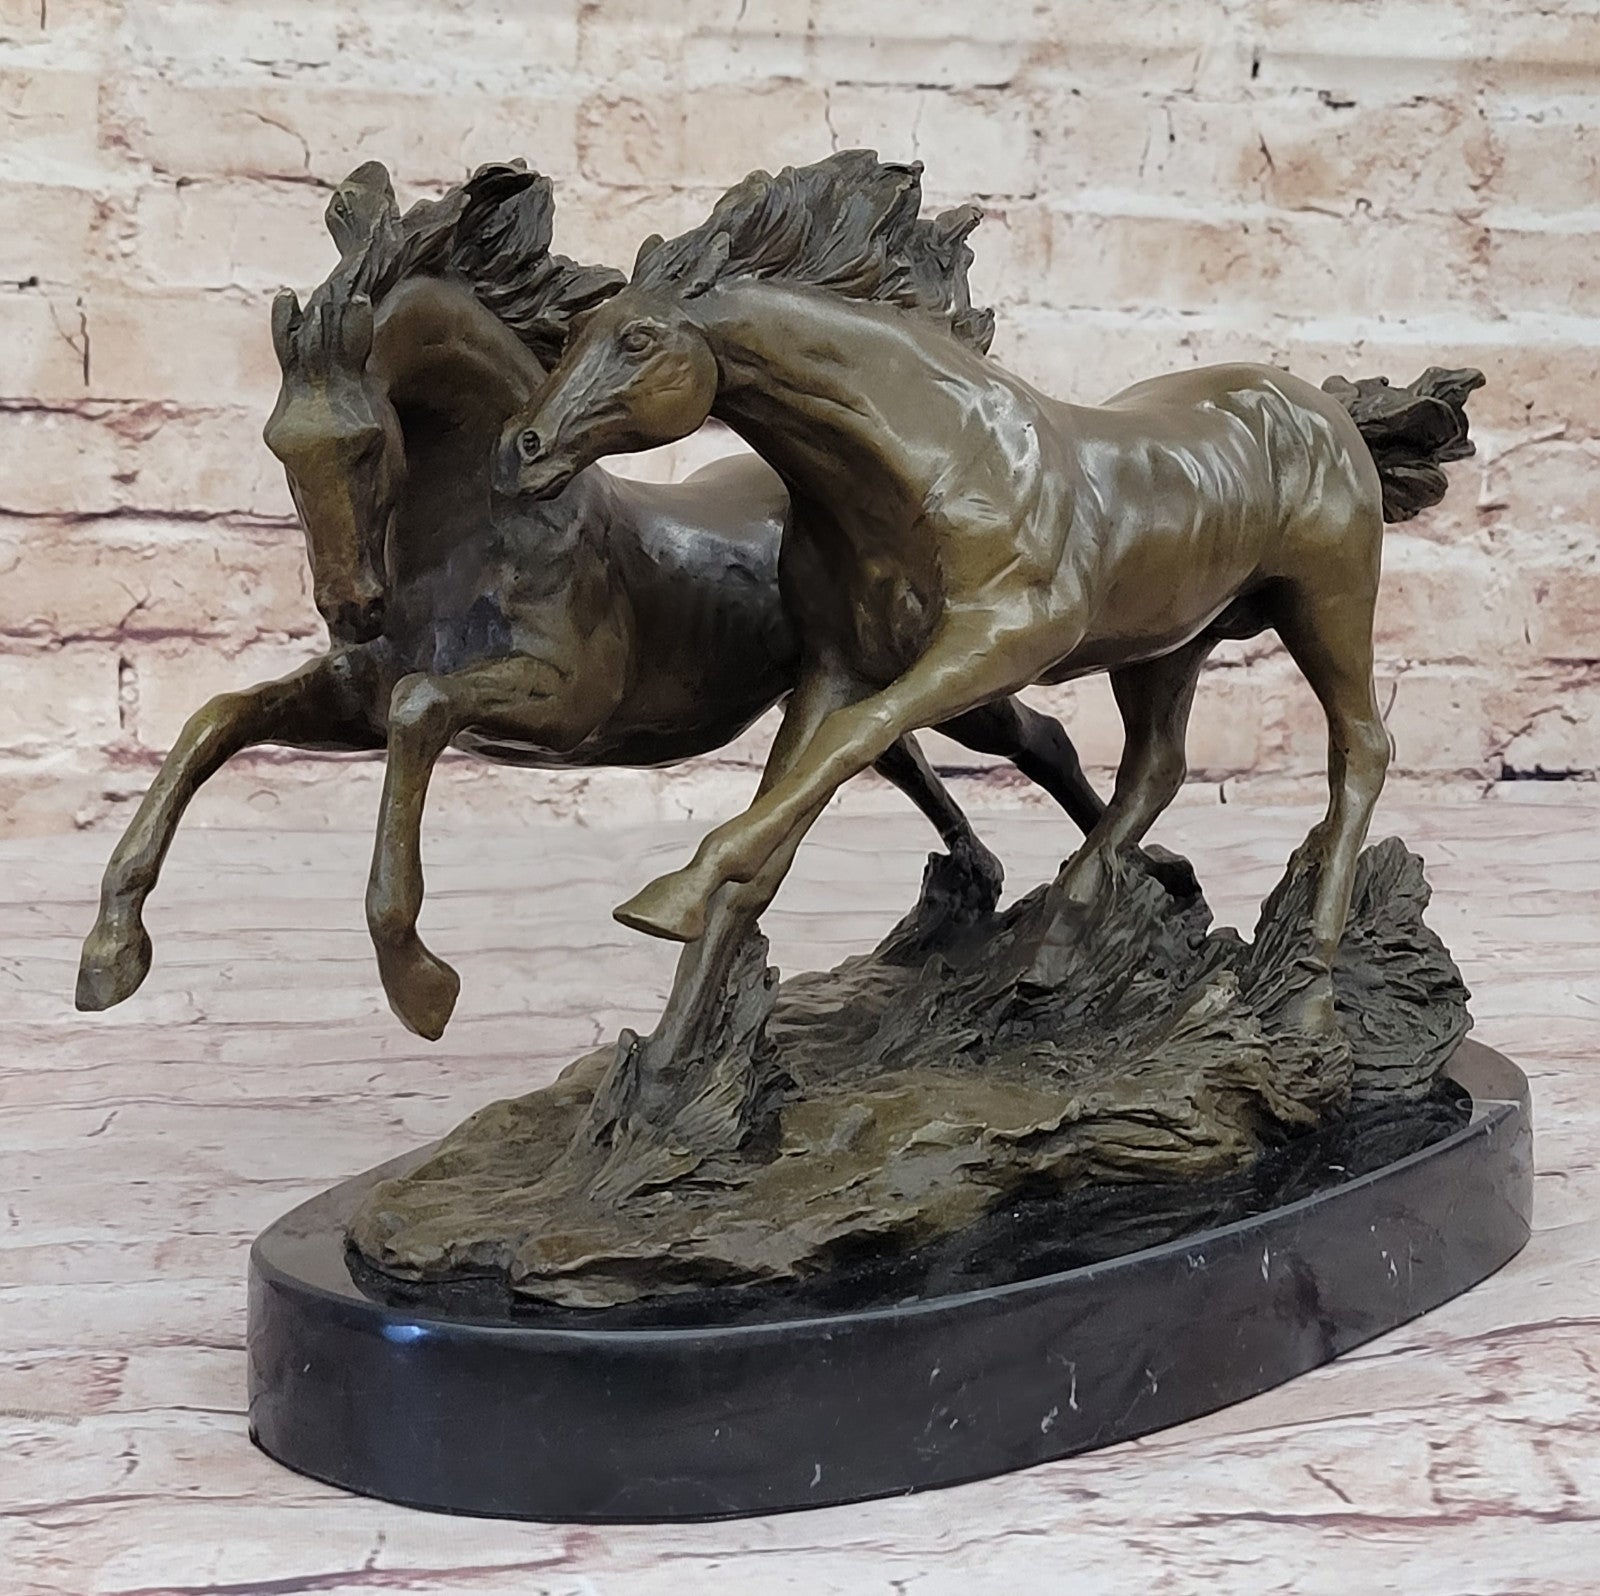 Signed Original B.C. Zhang: Two Large Stallions Bronze Sculpture, Handcrafted Artwork